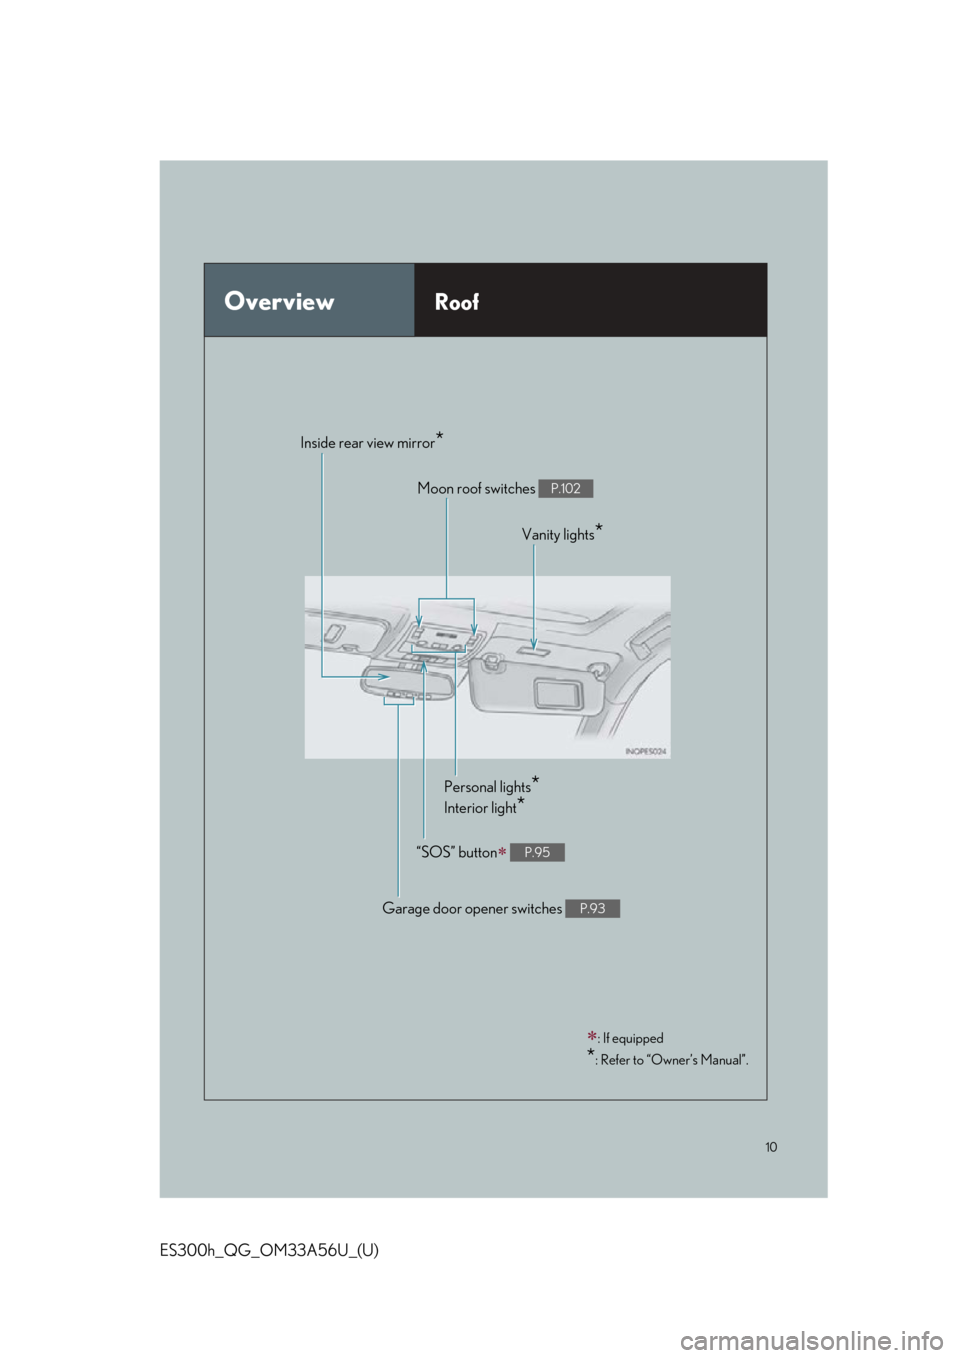 Lexus ES300h 2013  Do-it-yourself maintenance / Owners Manual Quick Guide (OM33A56U) 10
ES300h_QG_OM33A56U_(U)
OverviewRoof
: If equipped
*: Refer to “Owner’s Manual”.
Moon roof switches P.102
Personal lights*
Interior light*
“SOS” button P.95
Garage door opener switch